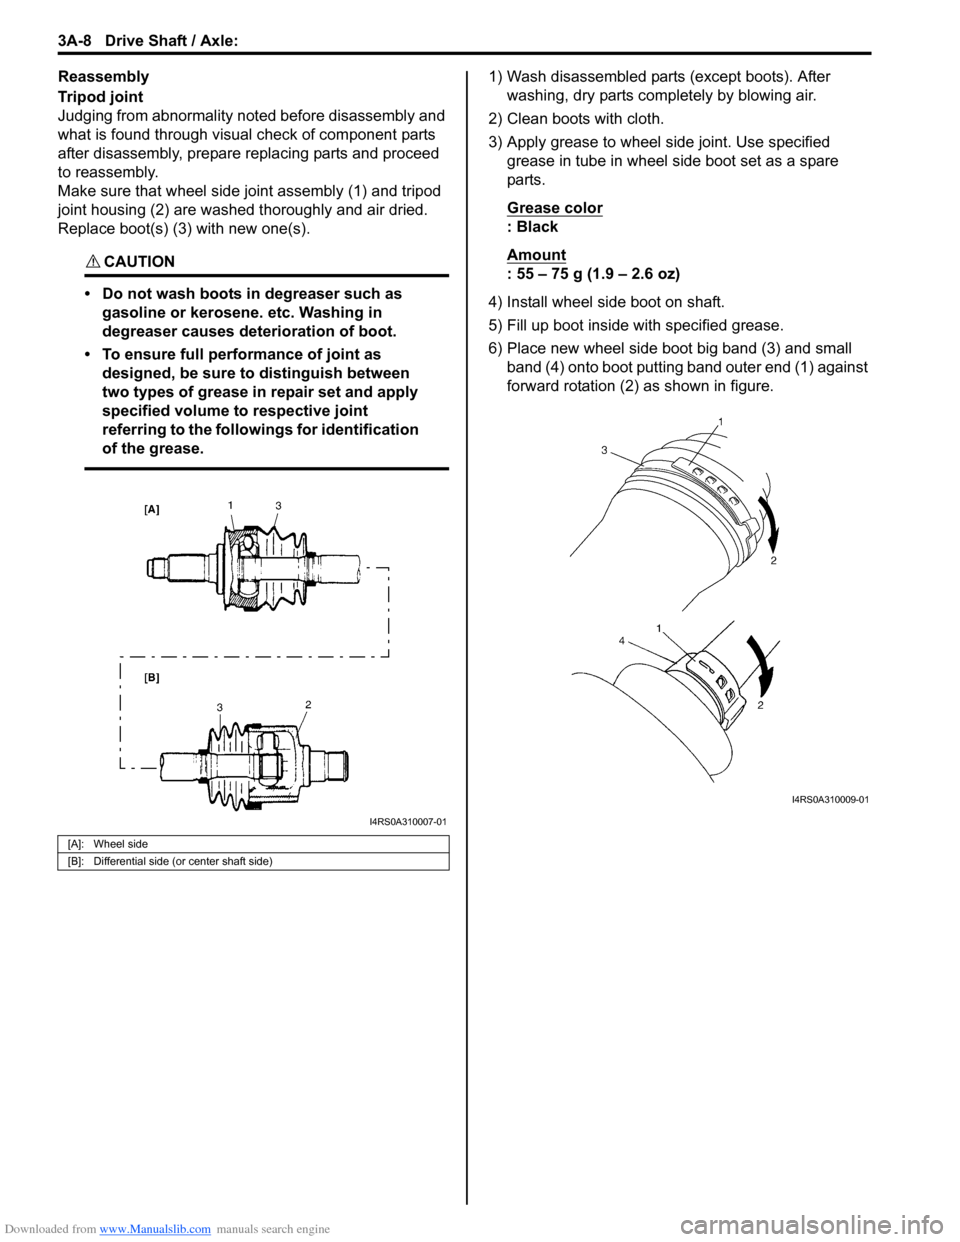 SUZUKI SWIFT 2005 2.G Service Service Manual Downloaded from www.Manualslib.com manuals search engine 3A-8 Drive Shaft / Axle: 
Reassembly
Tripod joint
Judging from abnormality noted before disassembly and 
what is found through visual check of 